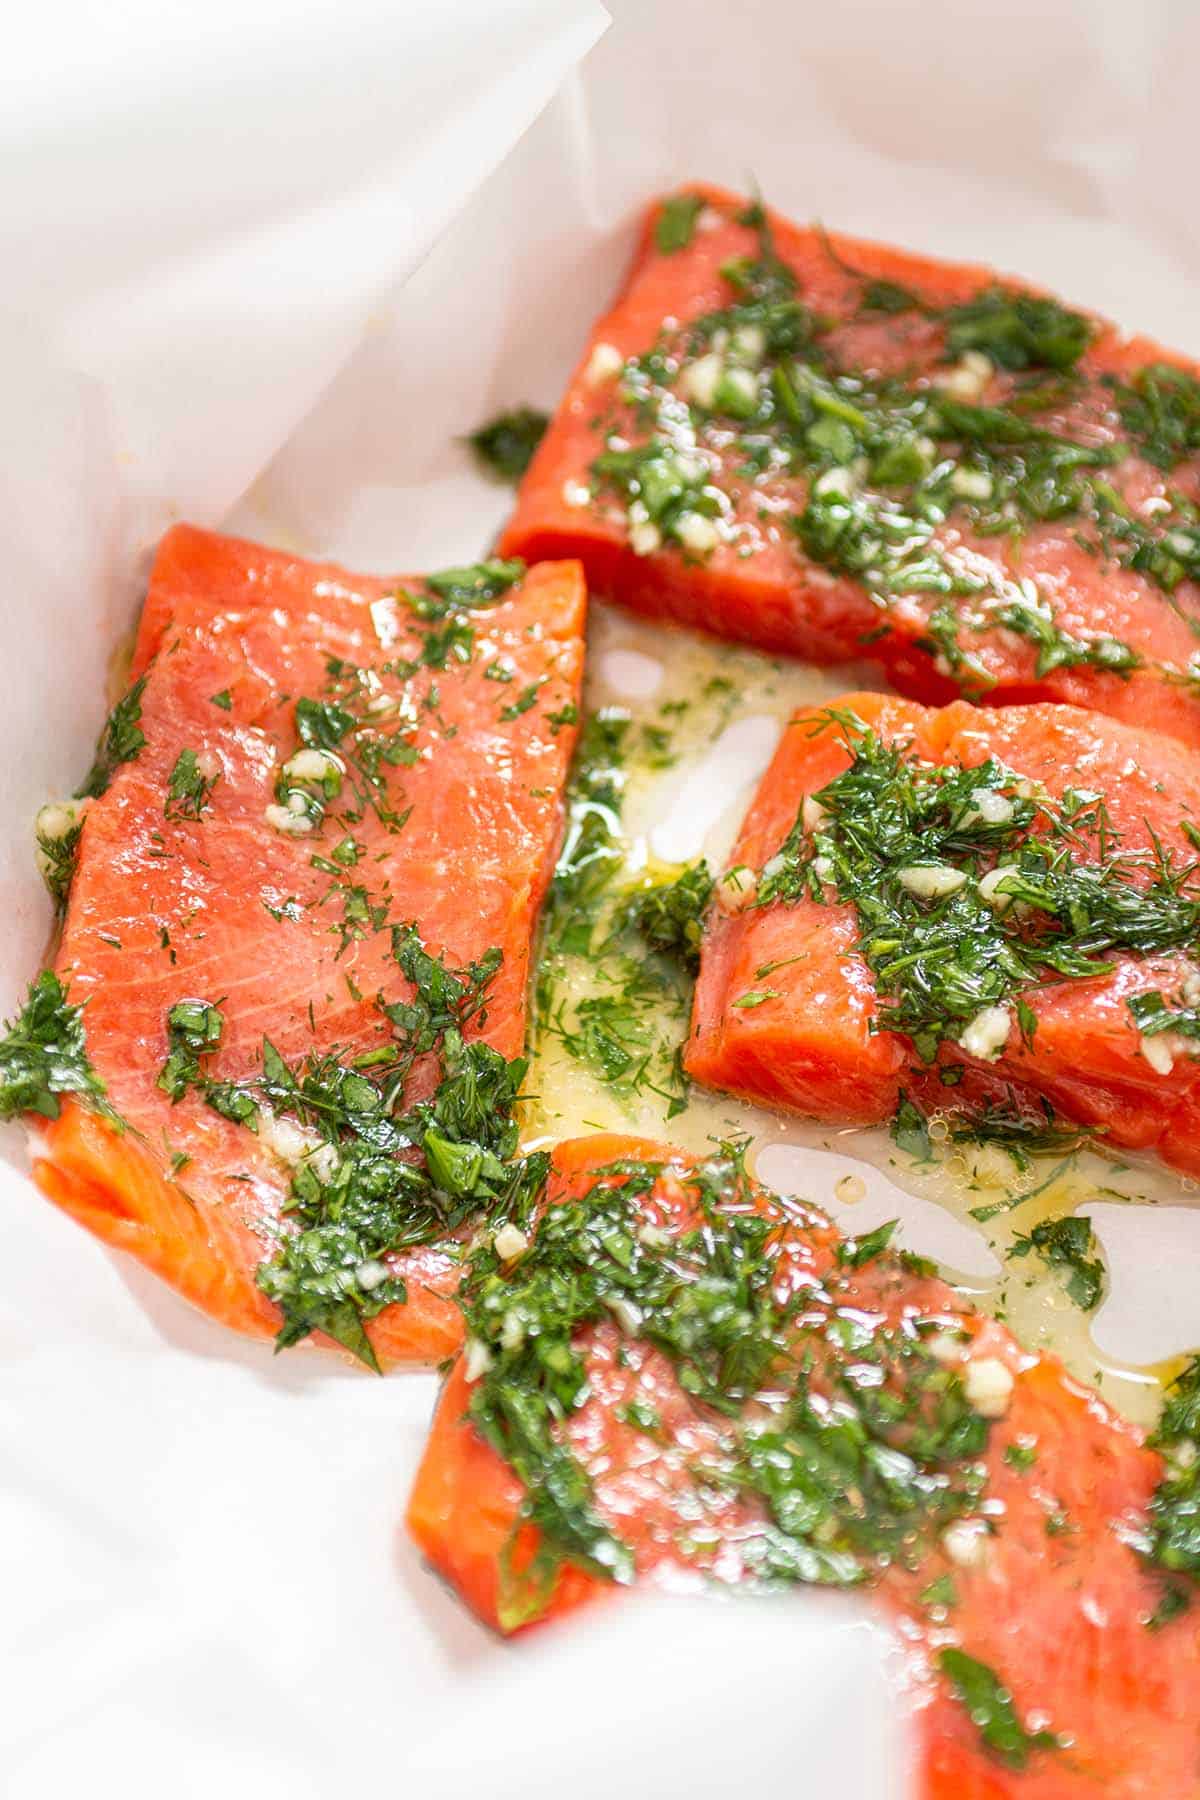 Chunks of salmon with herbs and olive oil.